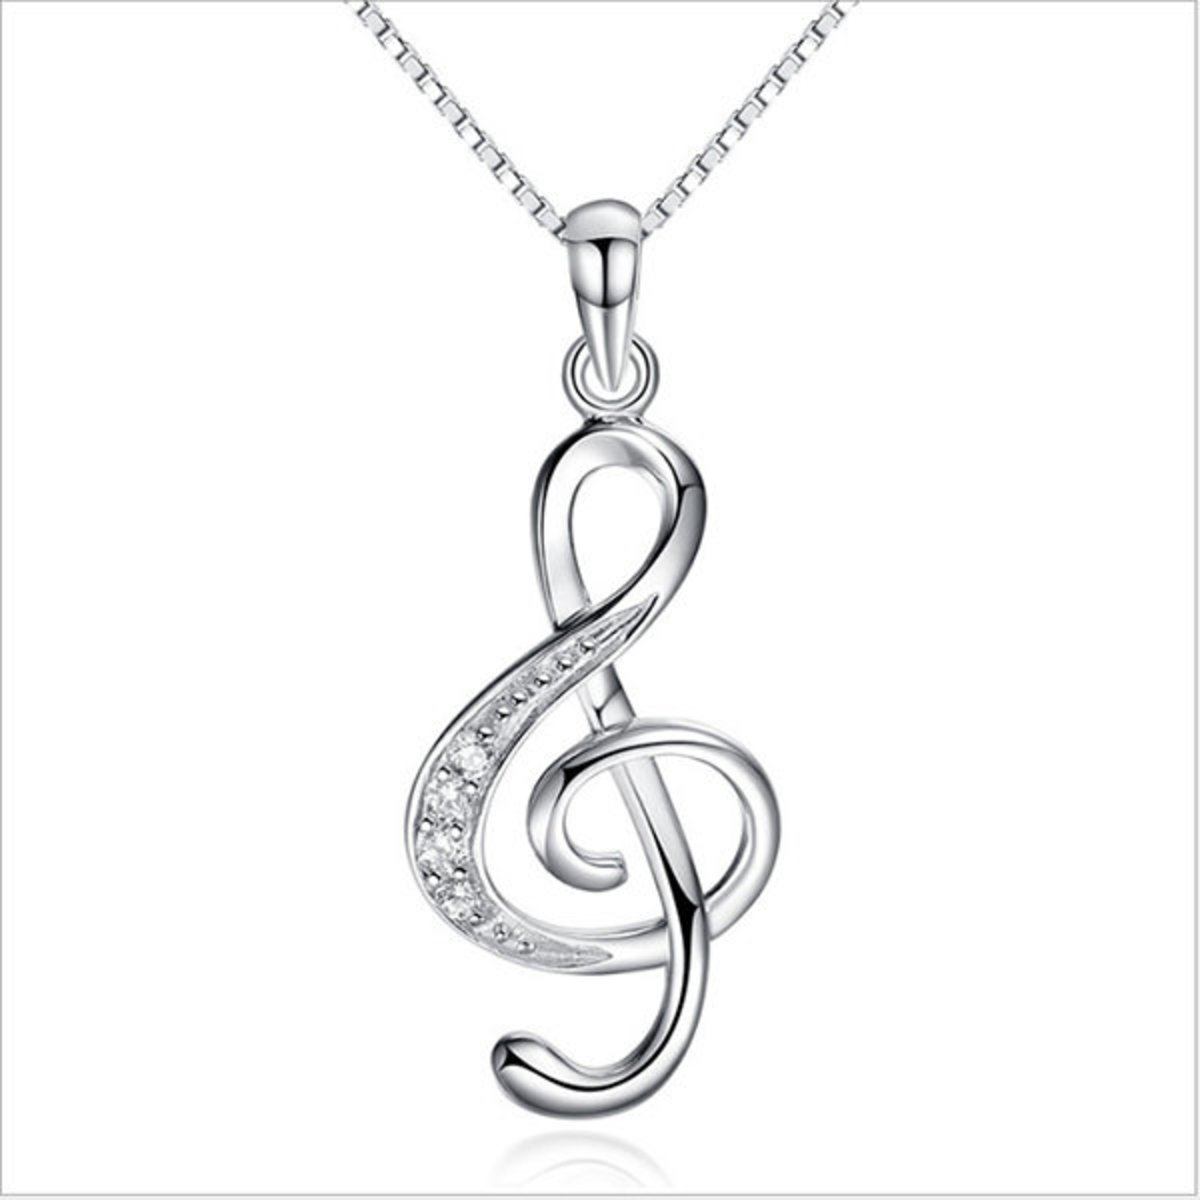 Musical note pendant silver-plated necklace J0206